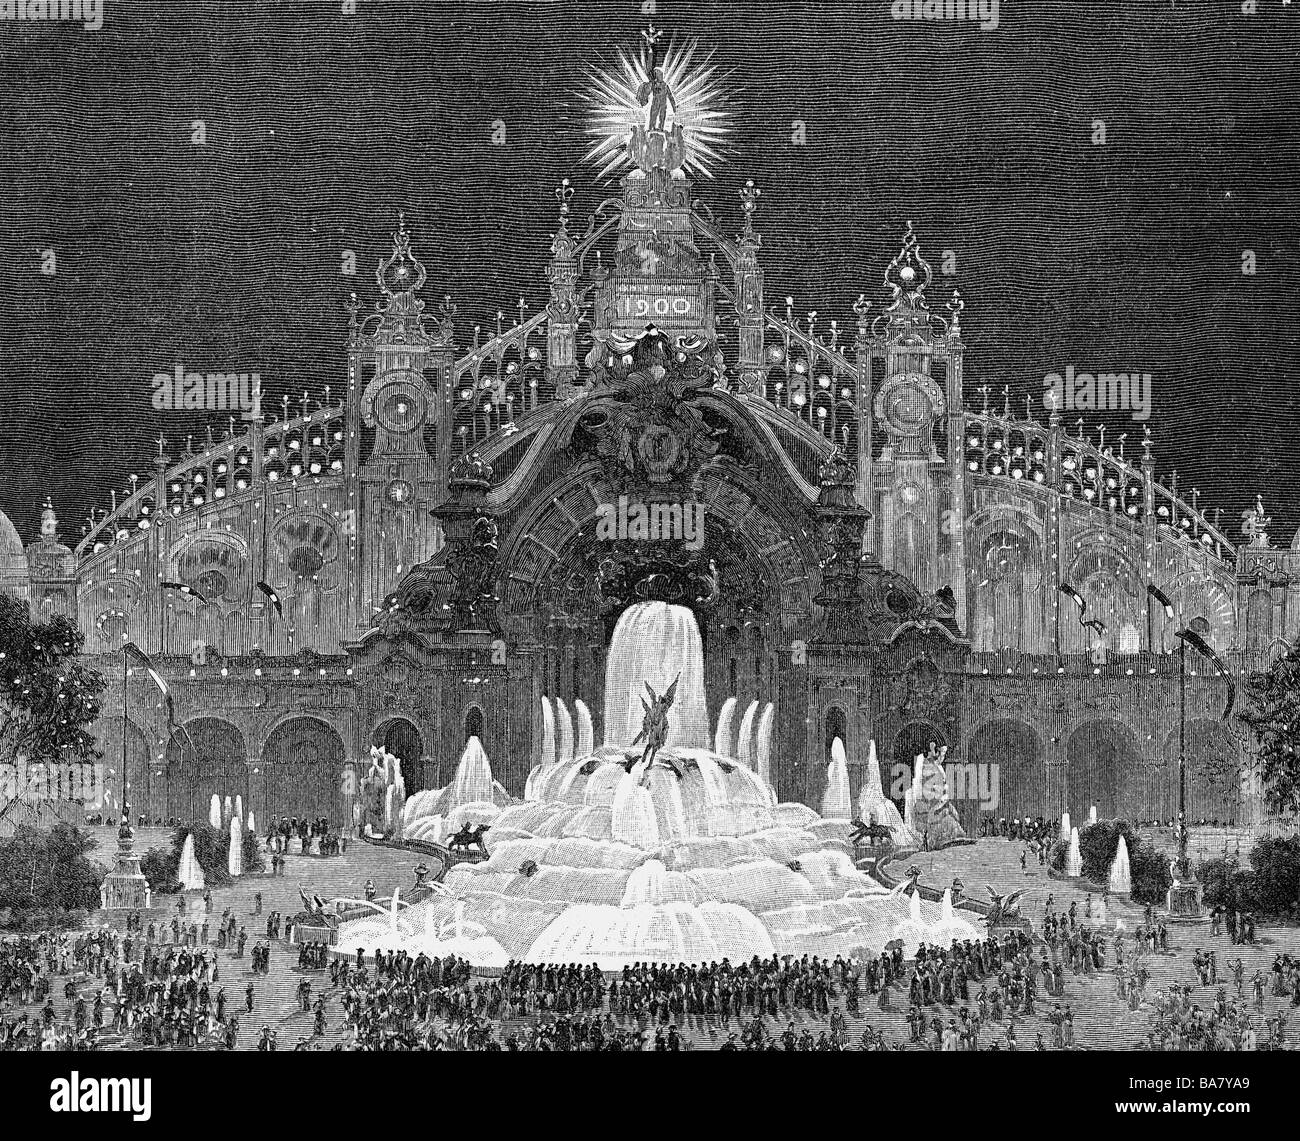 exhibitions, world exposition, Expostion Universelle, Paris, 15.4.1900 - 12.11.1900, Electricity palace, exterior view, wood engraving, 1900,  fountain, exhibition, France, architecture, hall, illumination, 19th century, historic, historical, Europe, people, 1900s, Stock Photo